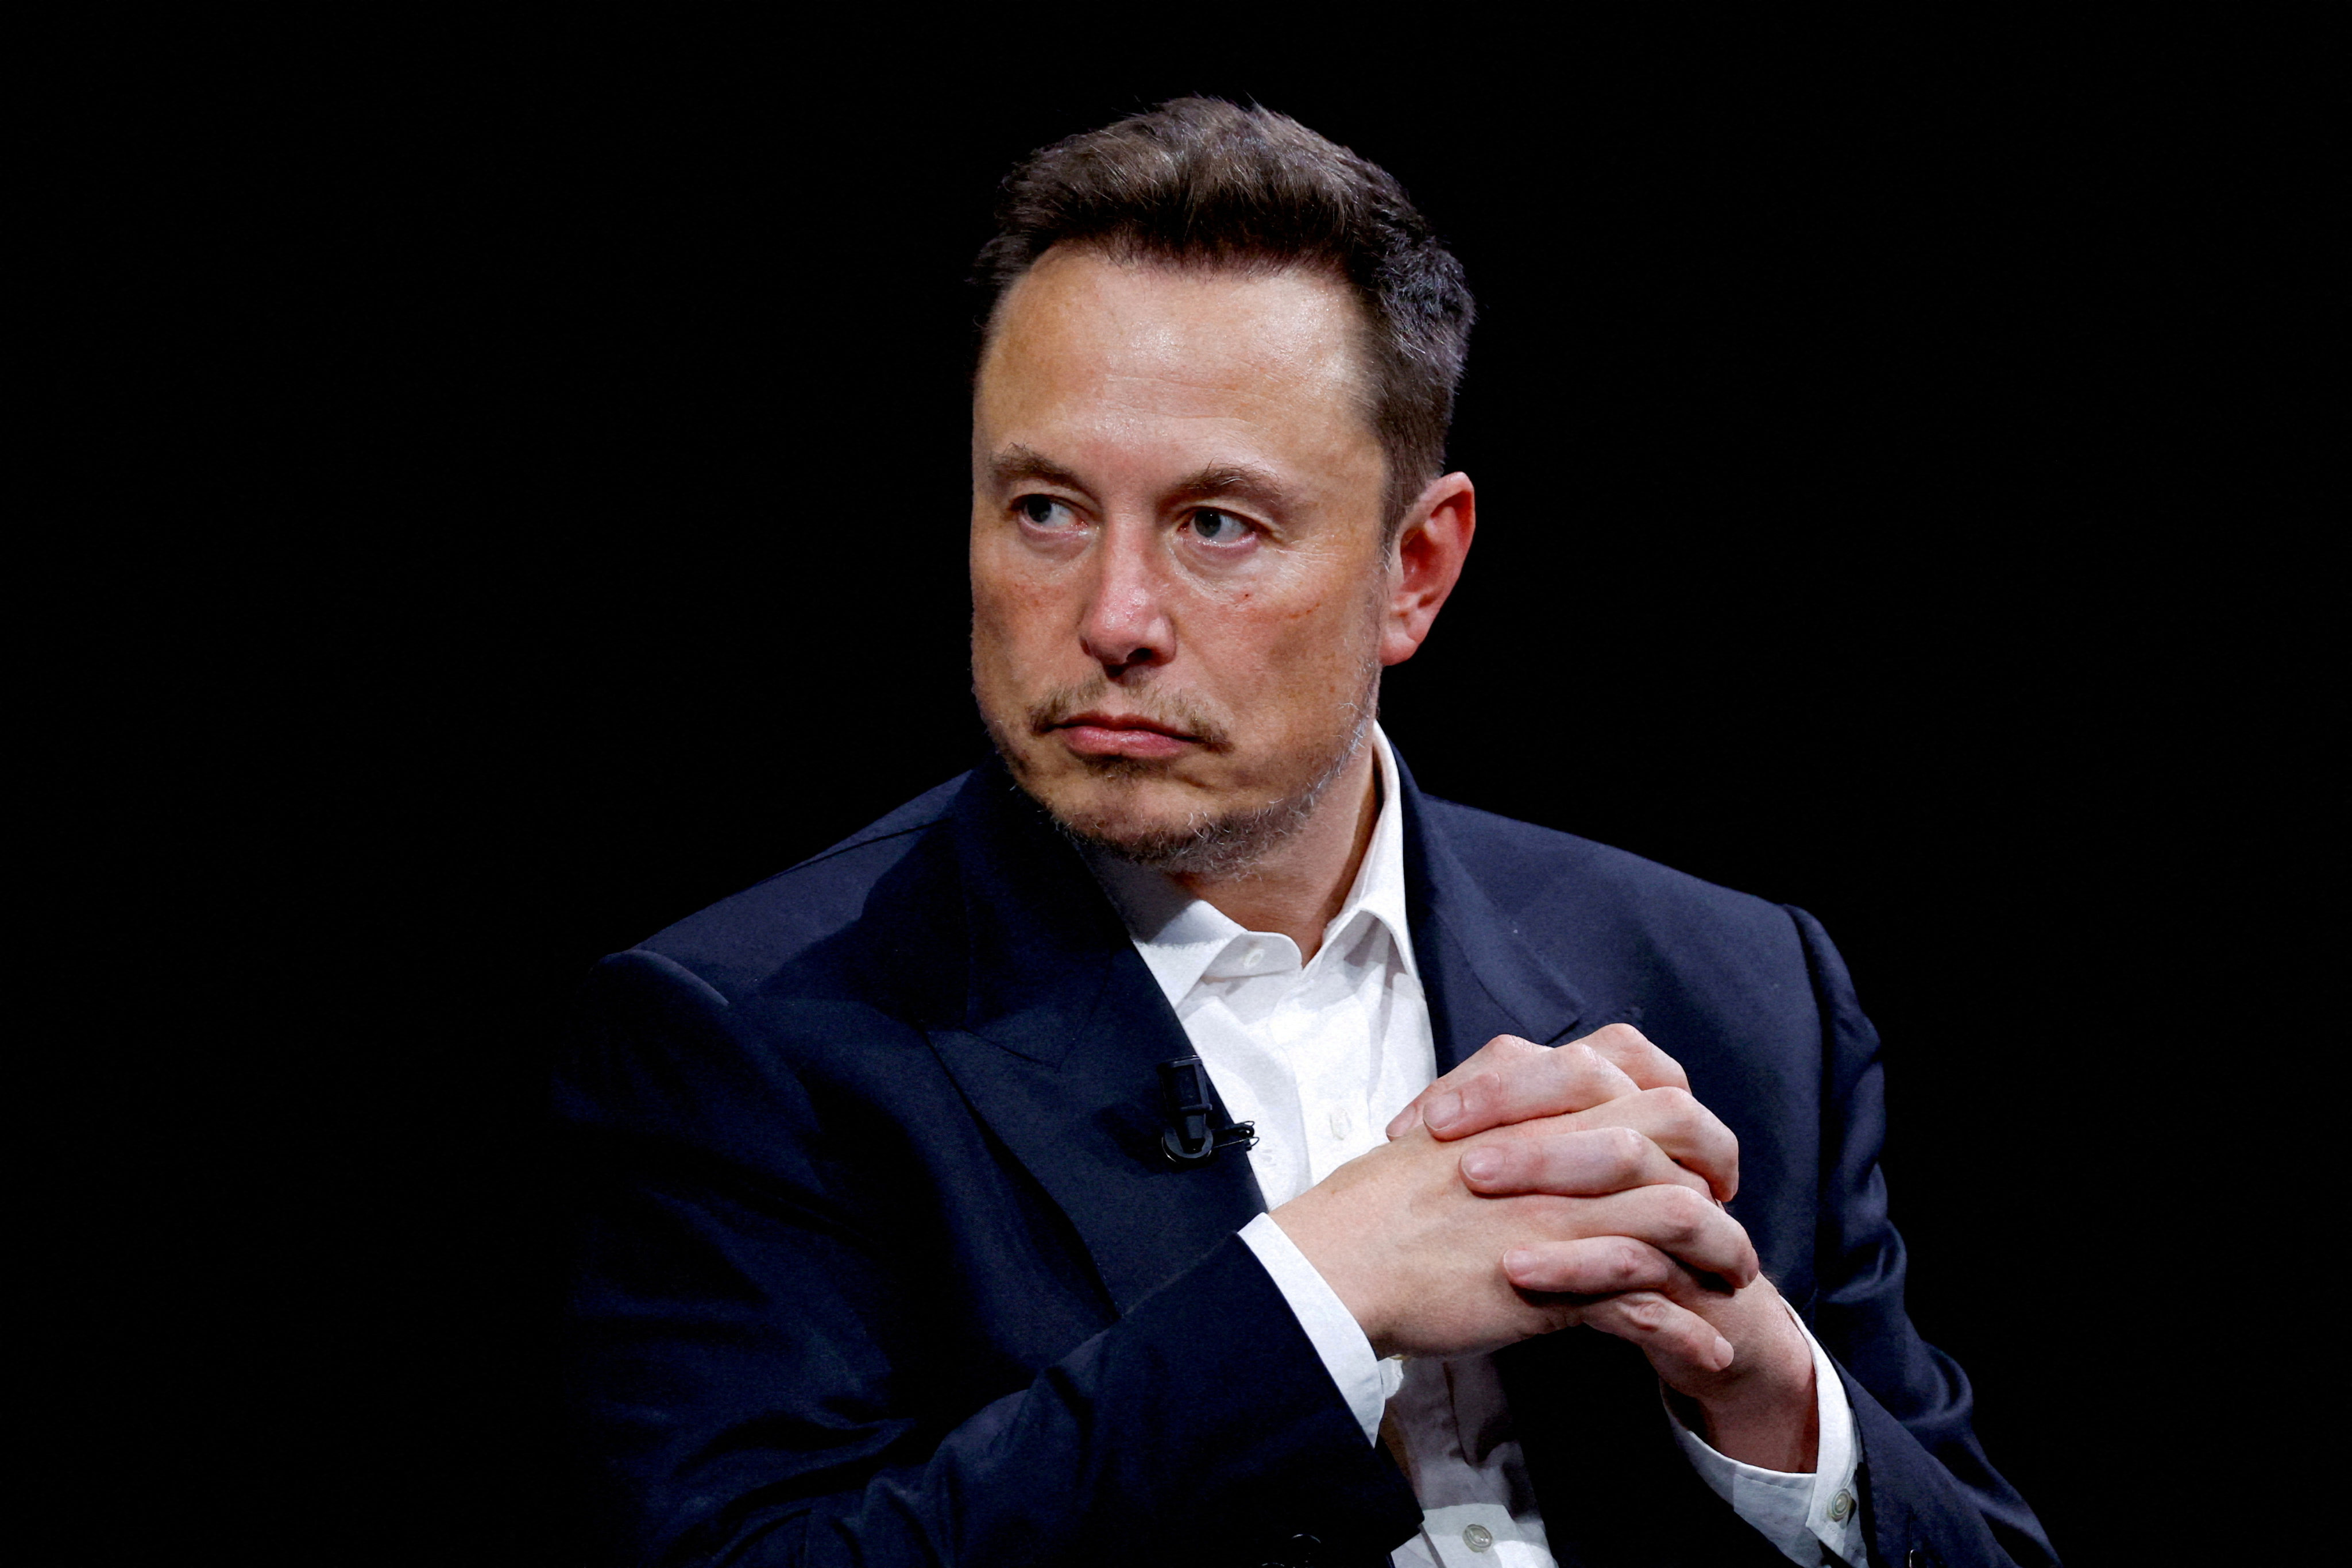 Tuesday’s ruling could take giant bite out of Elon Musk’s wealth. File photo: Reuters